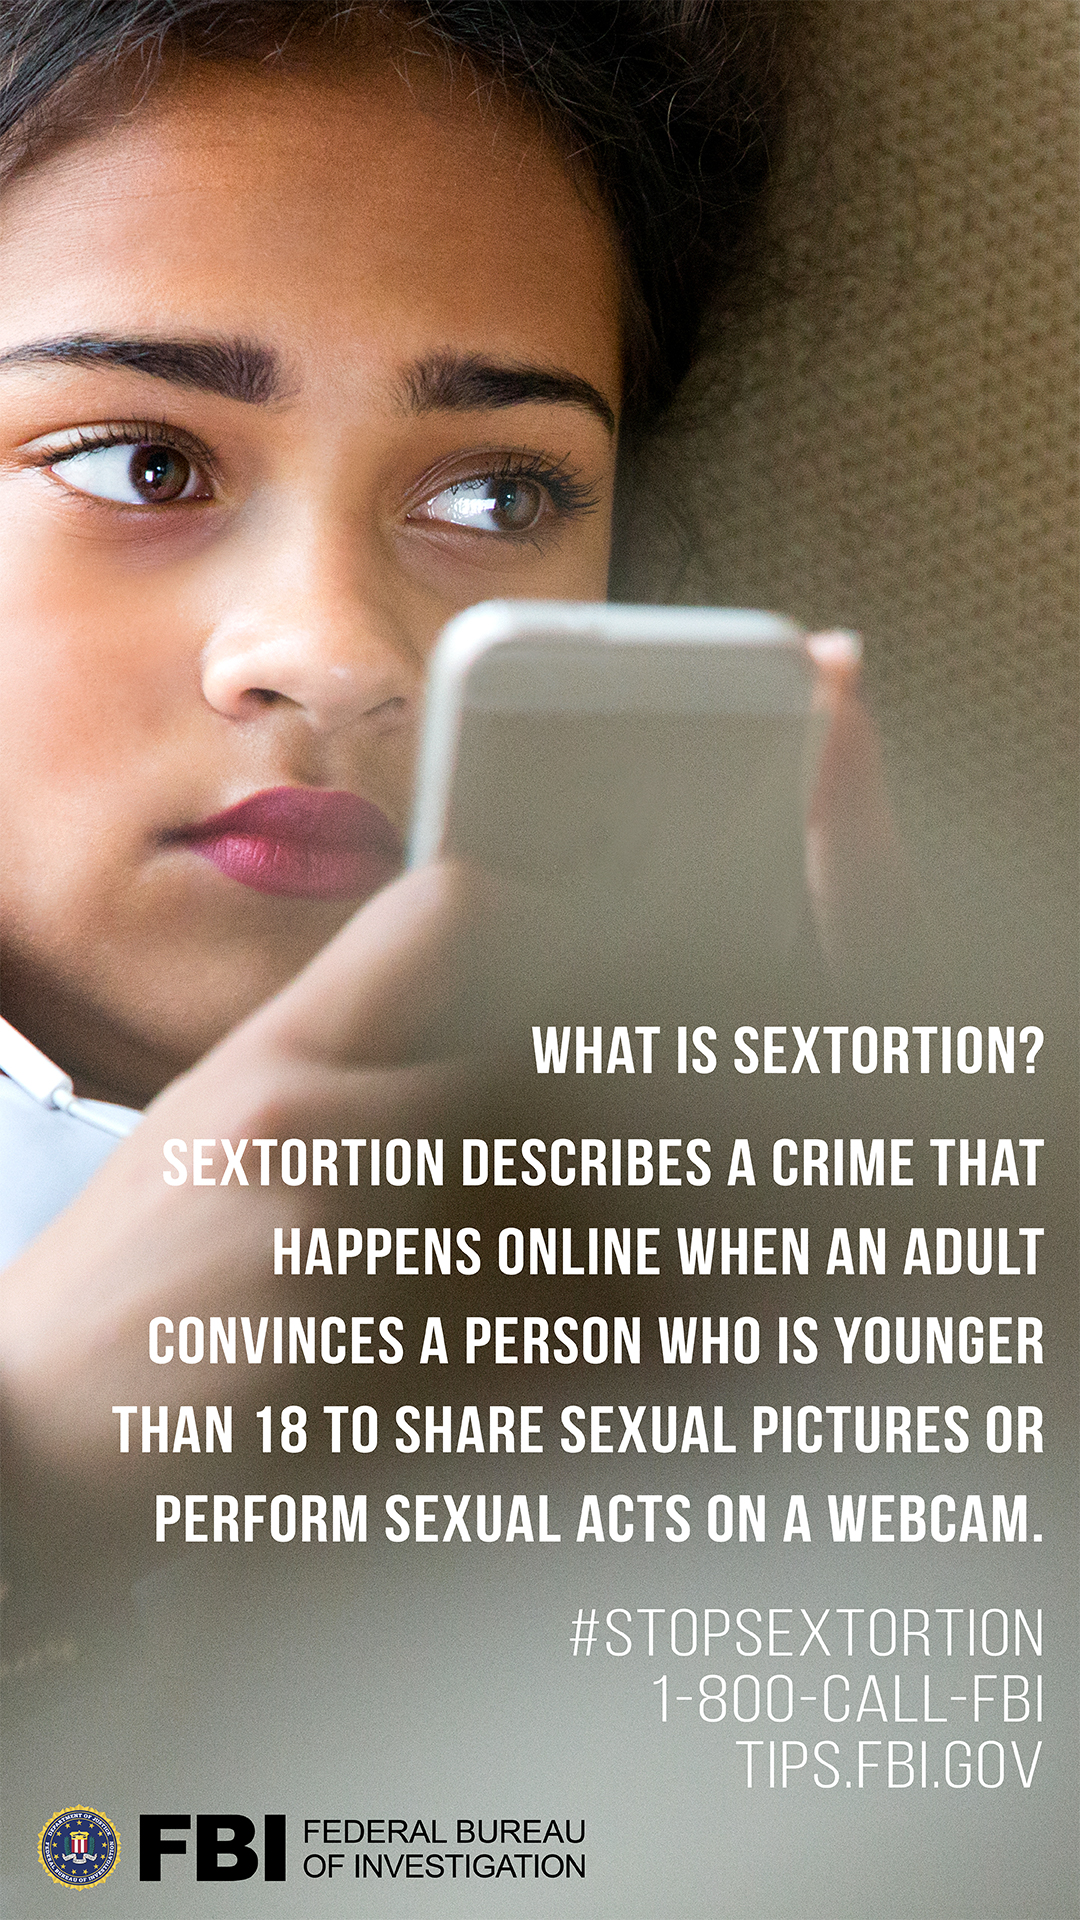 Sextortion Q&A: What is Sextortion?